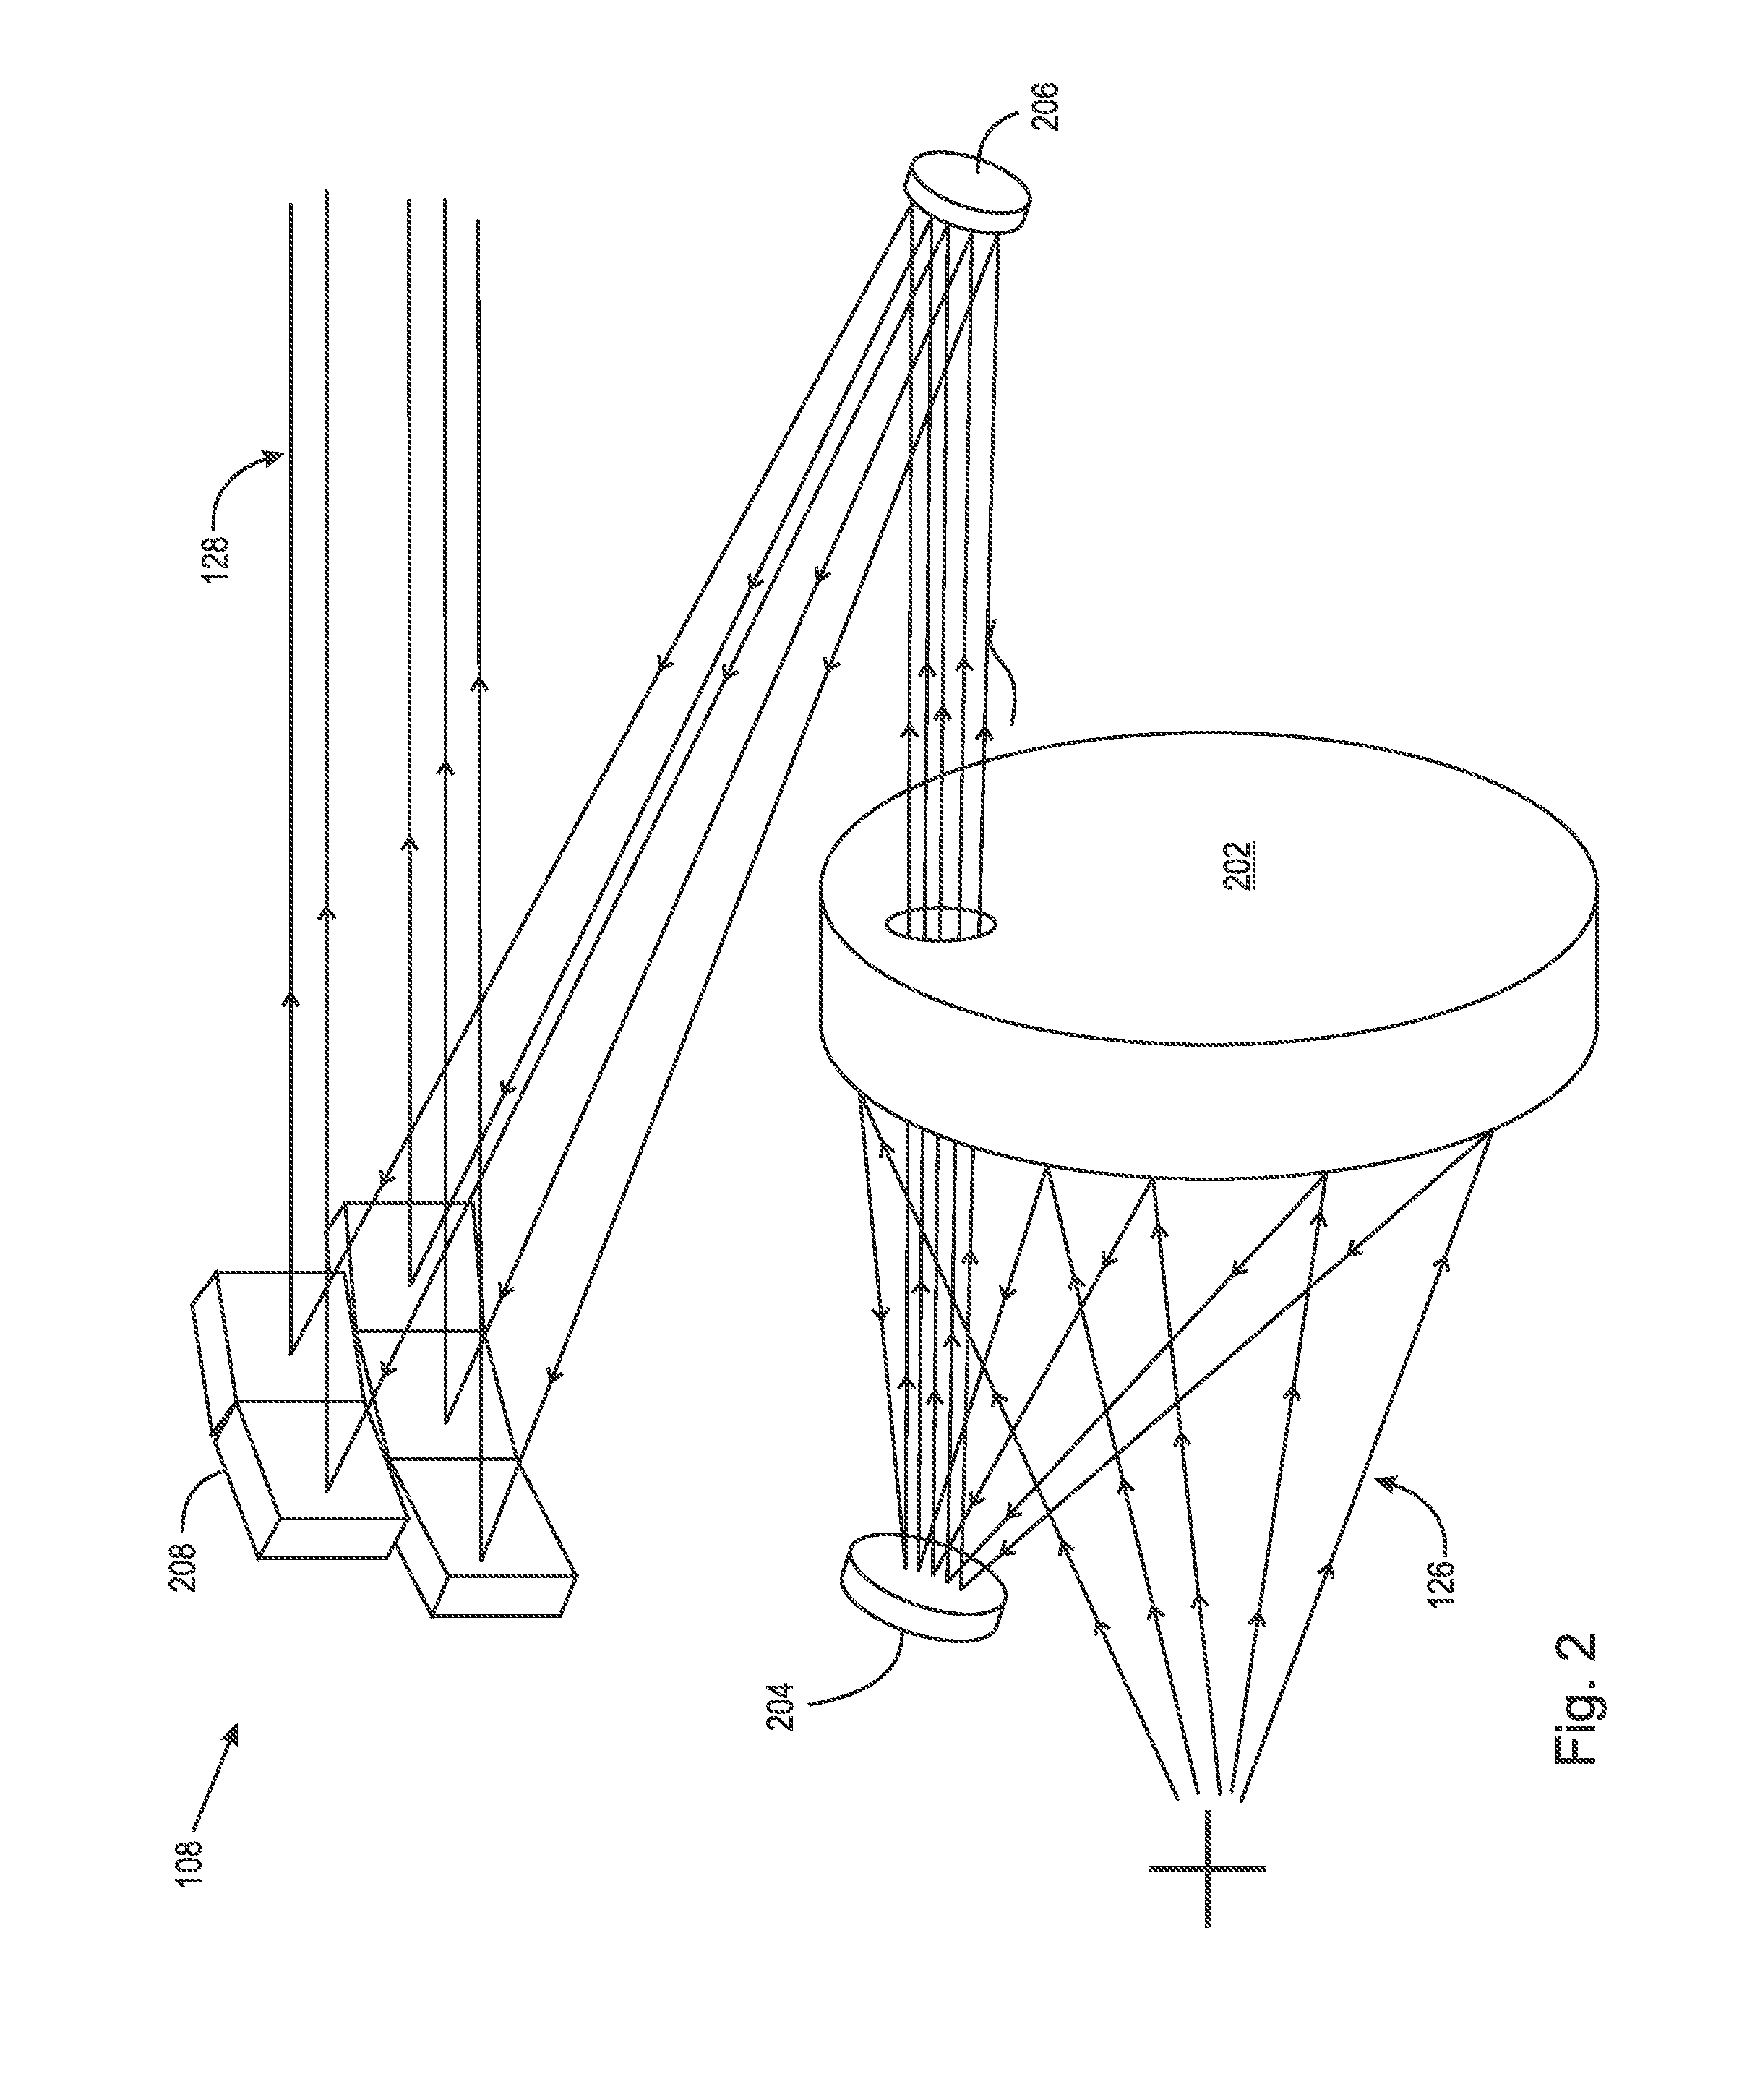 Segmented mirror apparatus for imaging and method of using the same